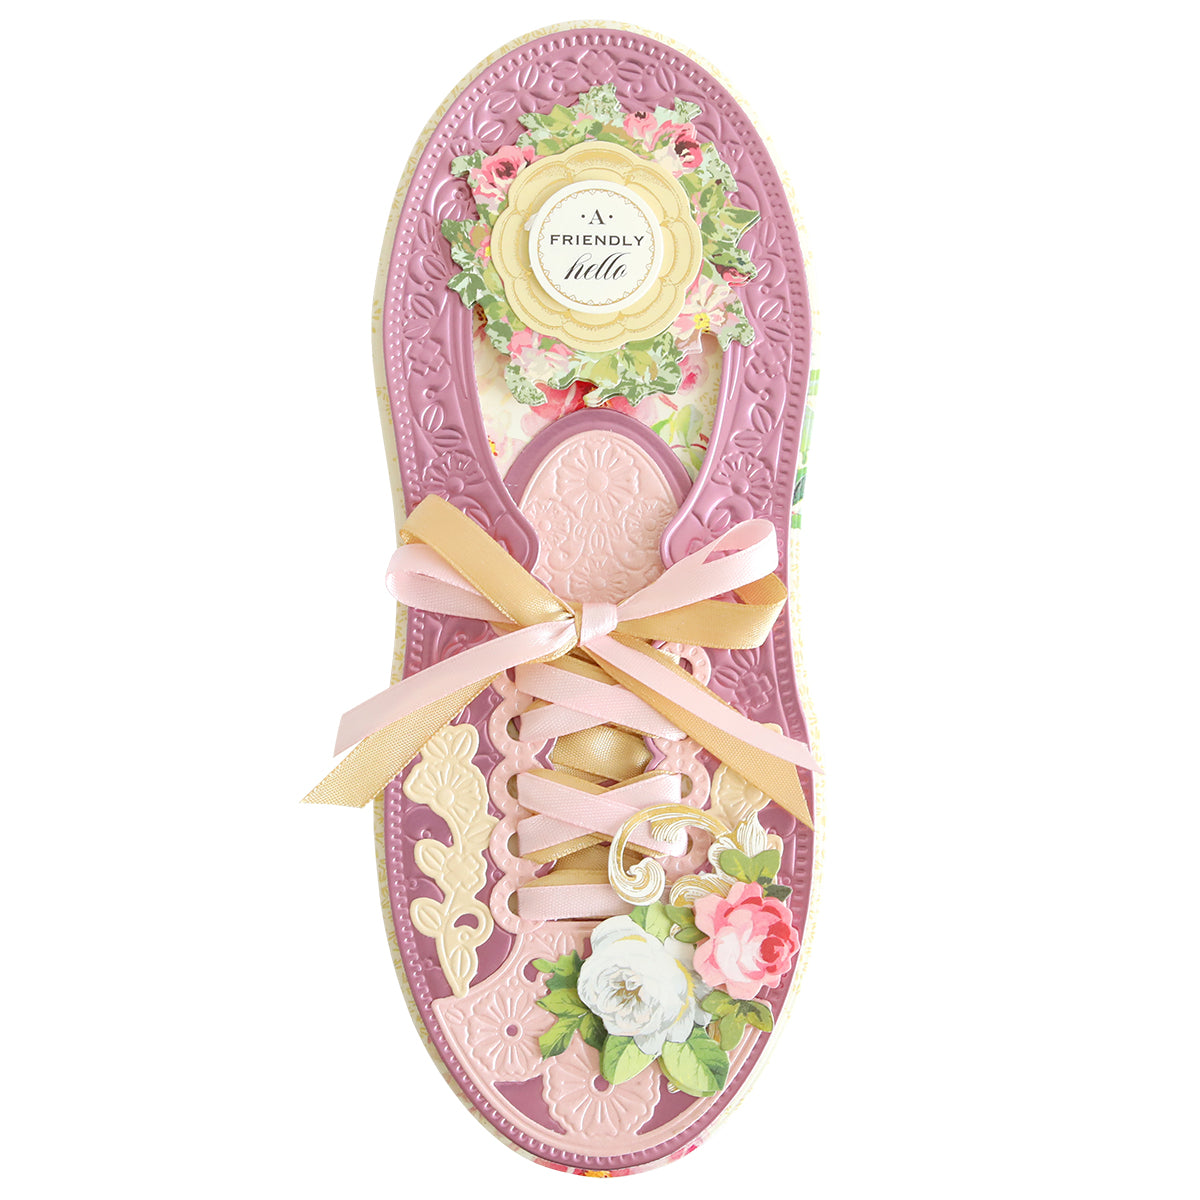 A decorative, cardboard shoe-shaped card for the true shoe lover, featuring floral patterns and a bow on the front with the text "Paper Sneaker Dies" on a circular label near the top.